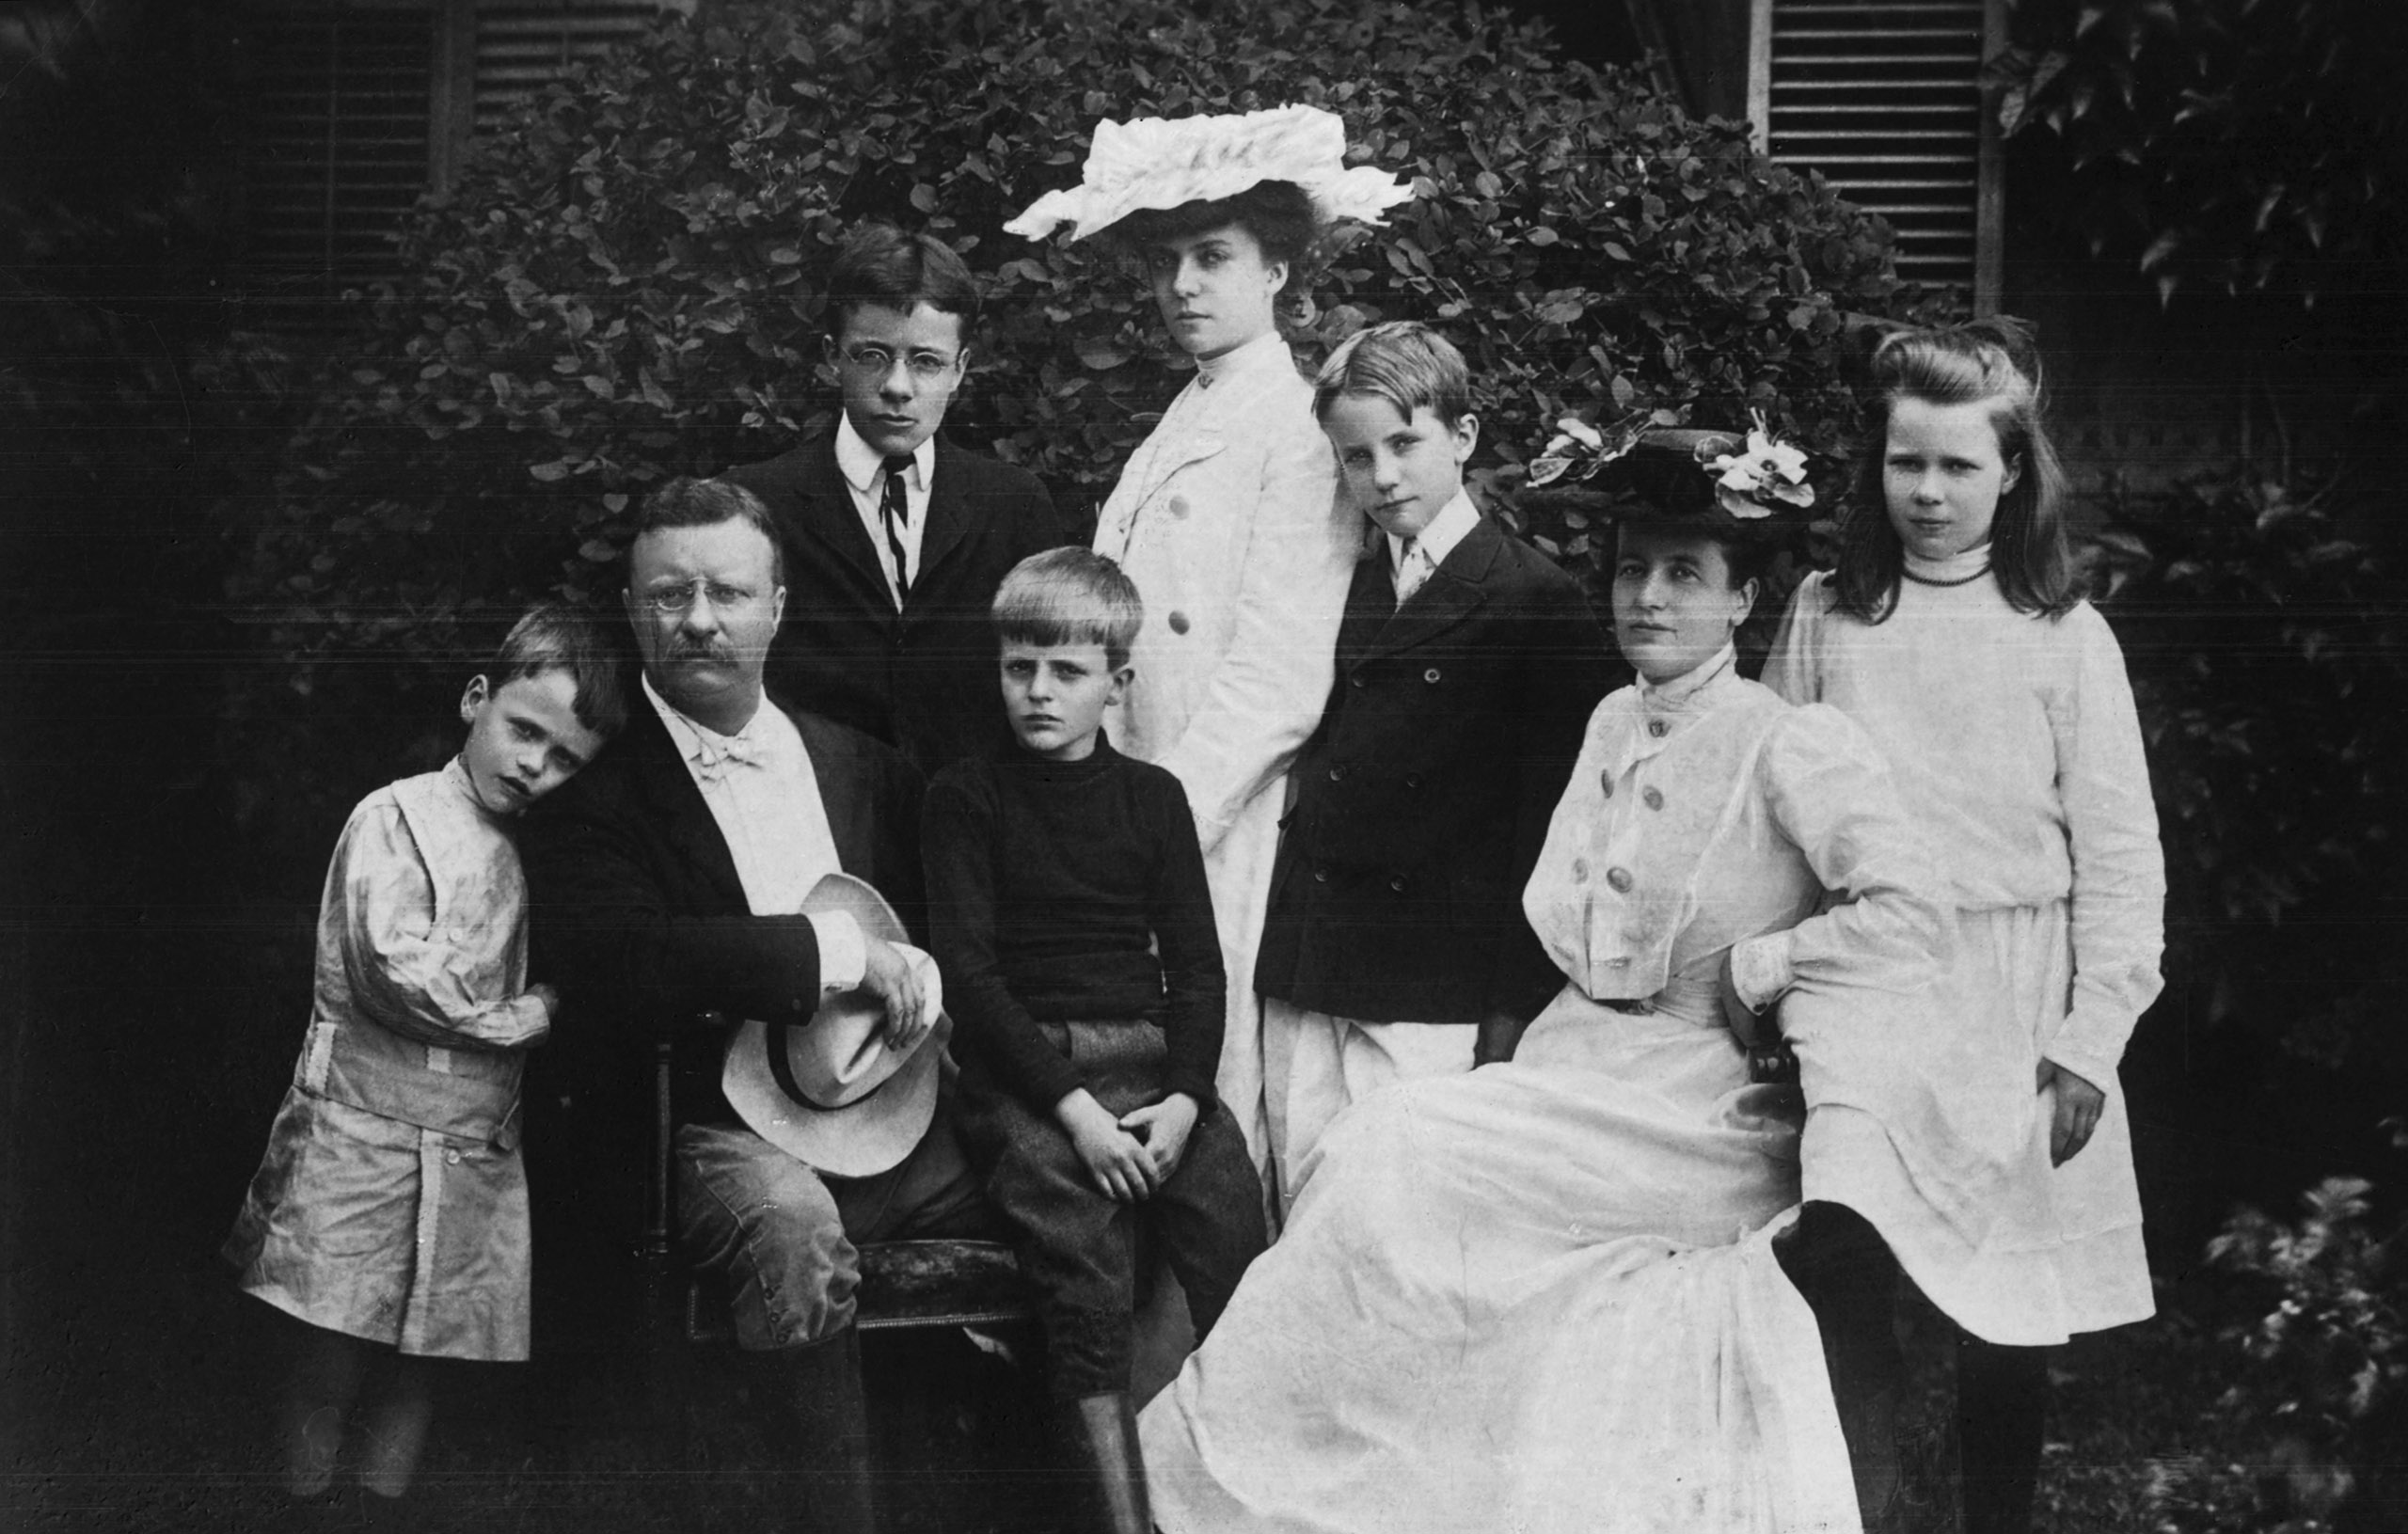 Theodore Roosevelt: The Roosevelt family poses for the camera two years after moving into the White House. They are, from left, Quentin, who would die as a fighter pilot in World War I; President Roosevelt; Ted, a highly decorated soldier who saw service in both World Wars; Archie, a businessman; Alice, the only child from Roosevelt's first marriage; Kermit, an adventurer and soldier of fortune; First Lady Edith; and Ethel, who served as a nurse in France during World War I and later became involved with the Red Cross.